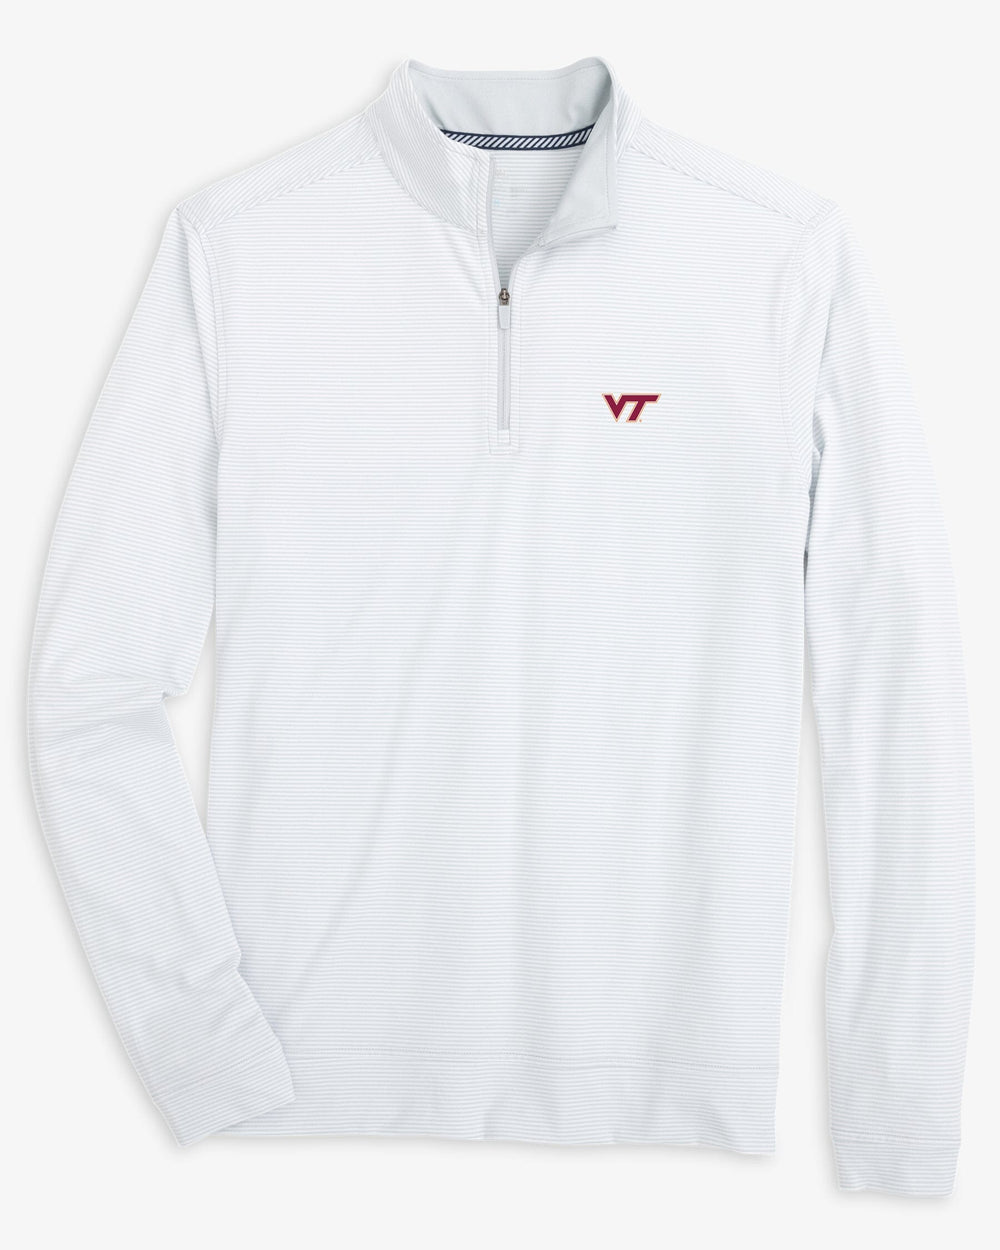 The front view of the Virginia Tech Hokies Cruiser Micro-Stripe Heather Quarter Zip by Southern Tide - Heather Slate Grey